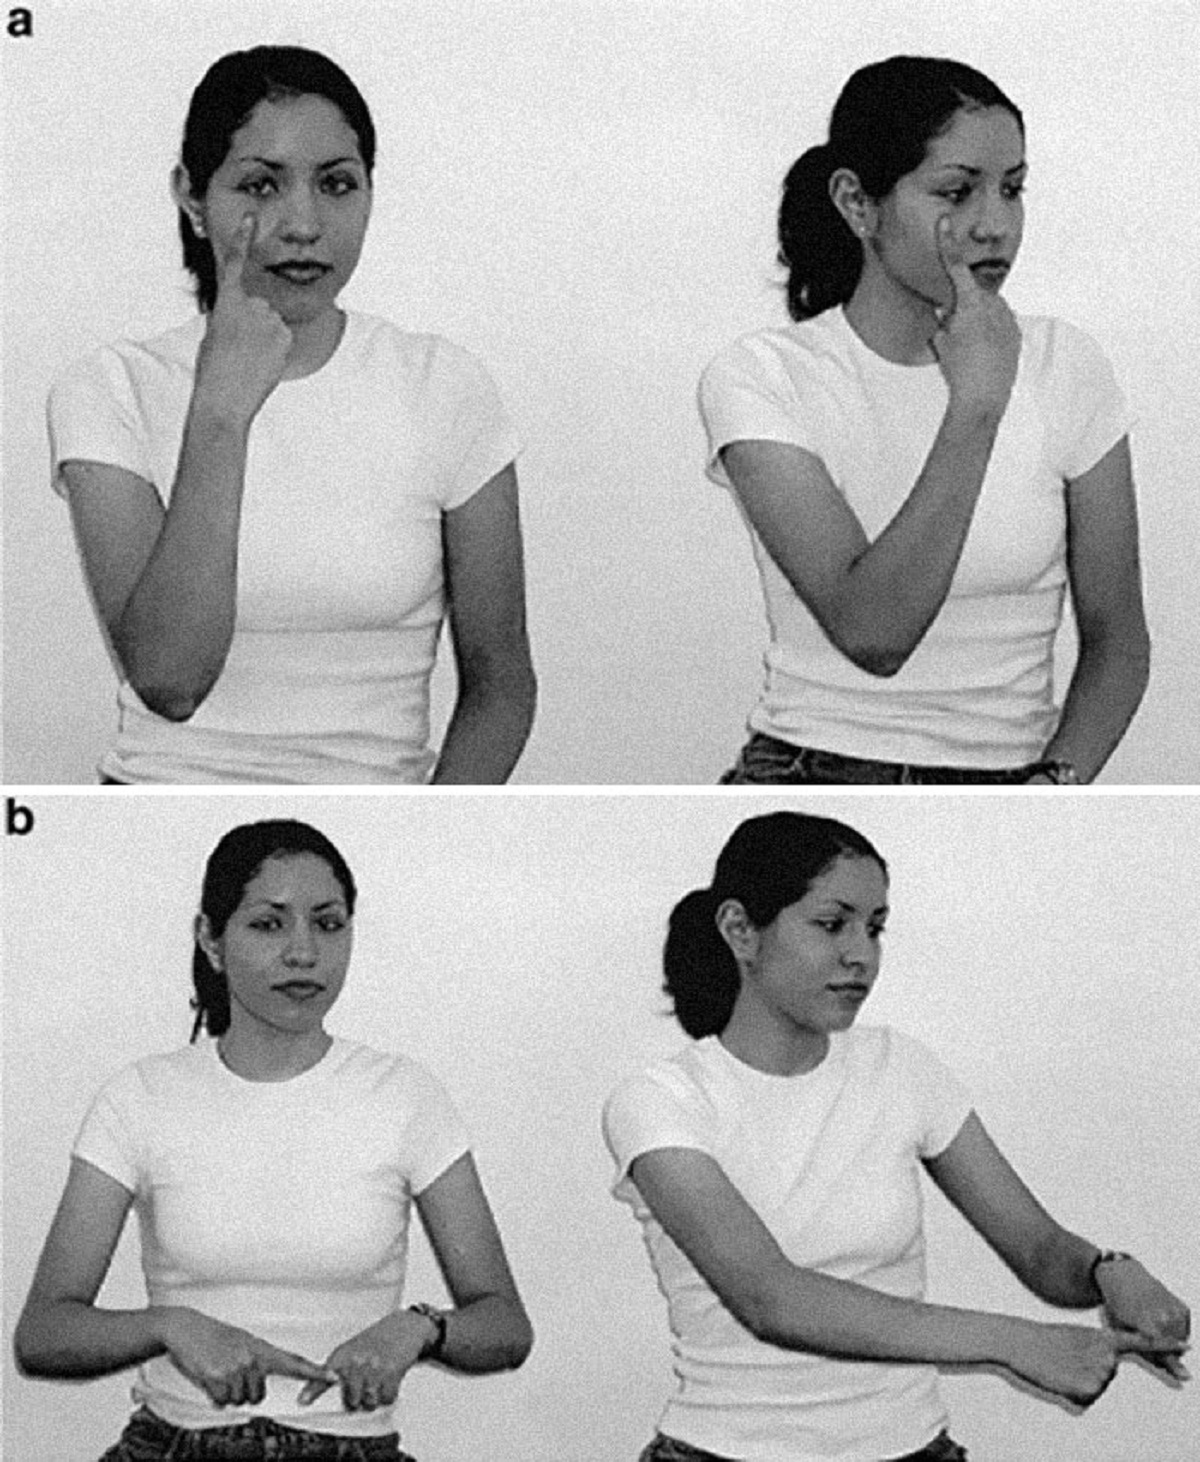 Nicaraguan Sign Language is a sign language that spontaneously developed among deaf children in Nicaragua in the 1980s. It is of particular interest to linguists because it is believed to be to be an example of the birth of a new language, unrelated to any other.